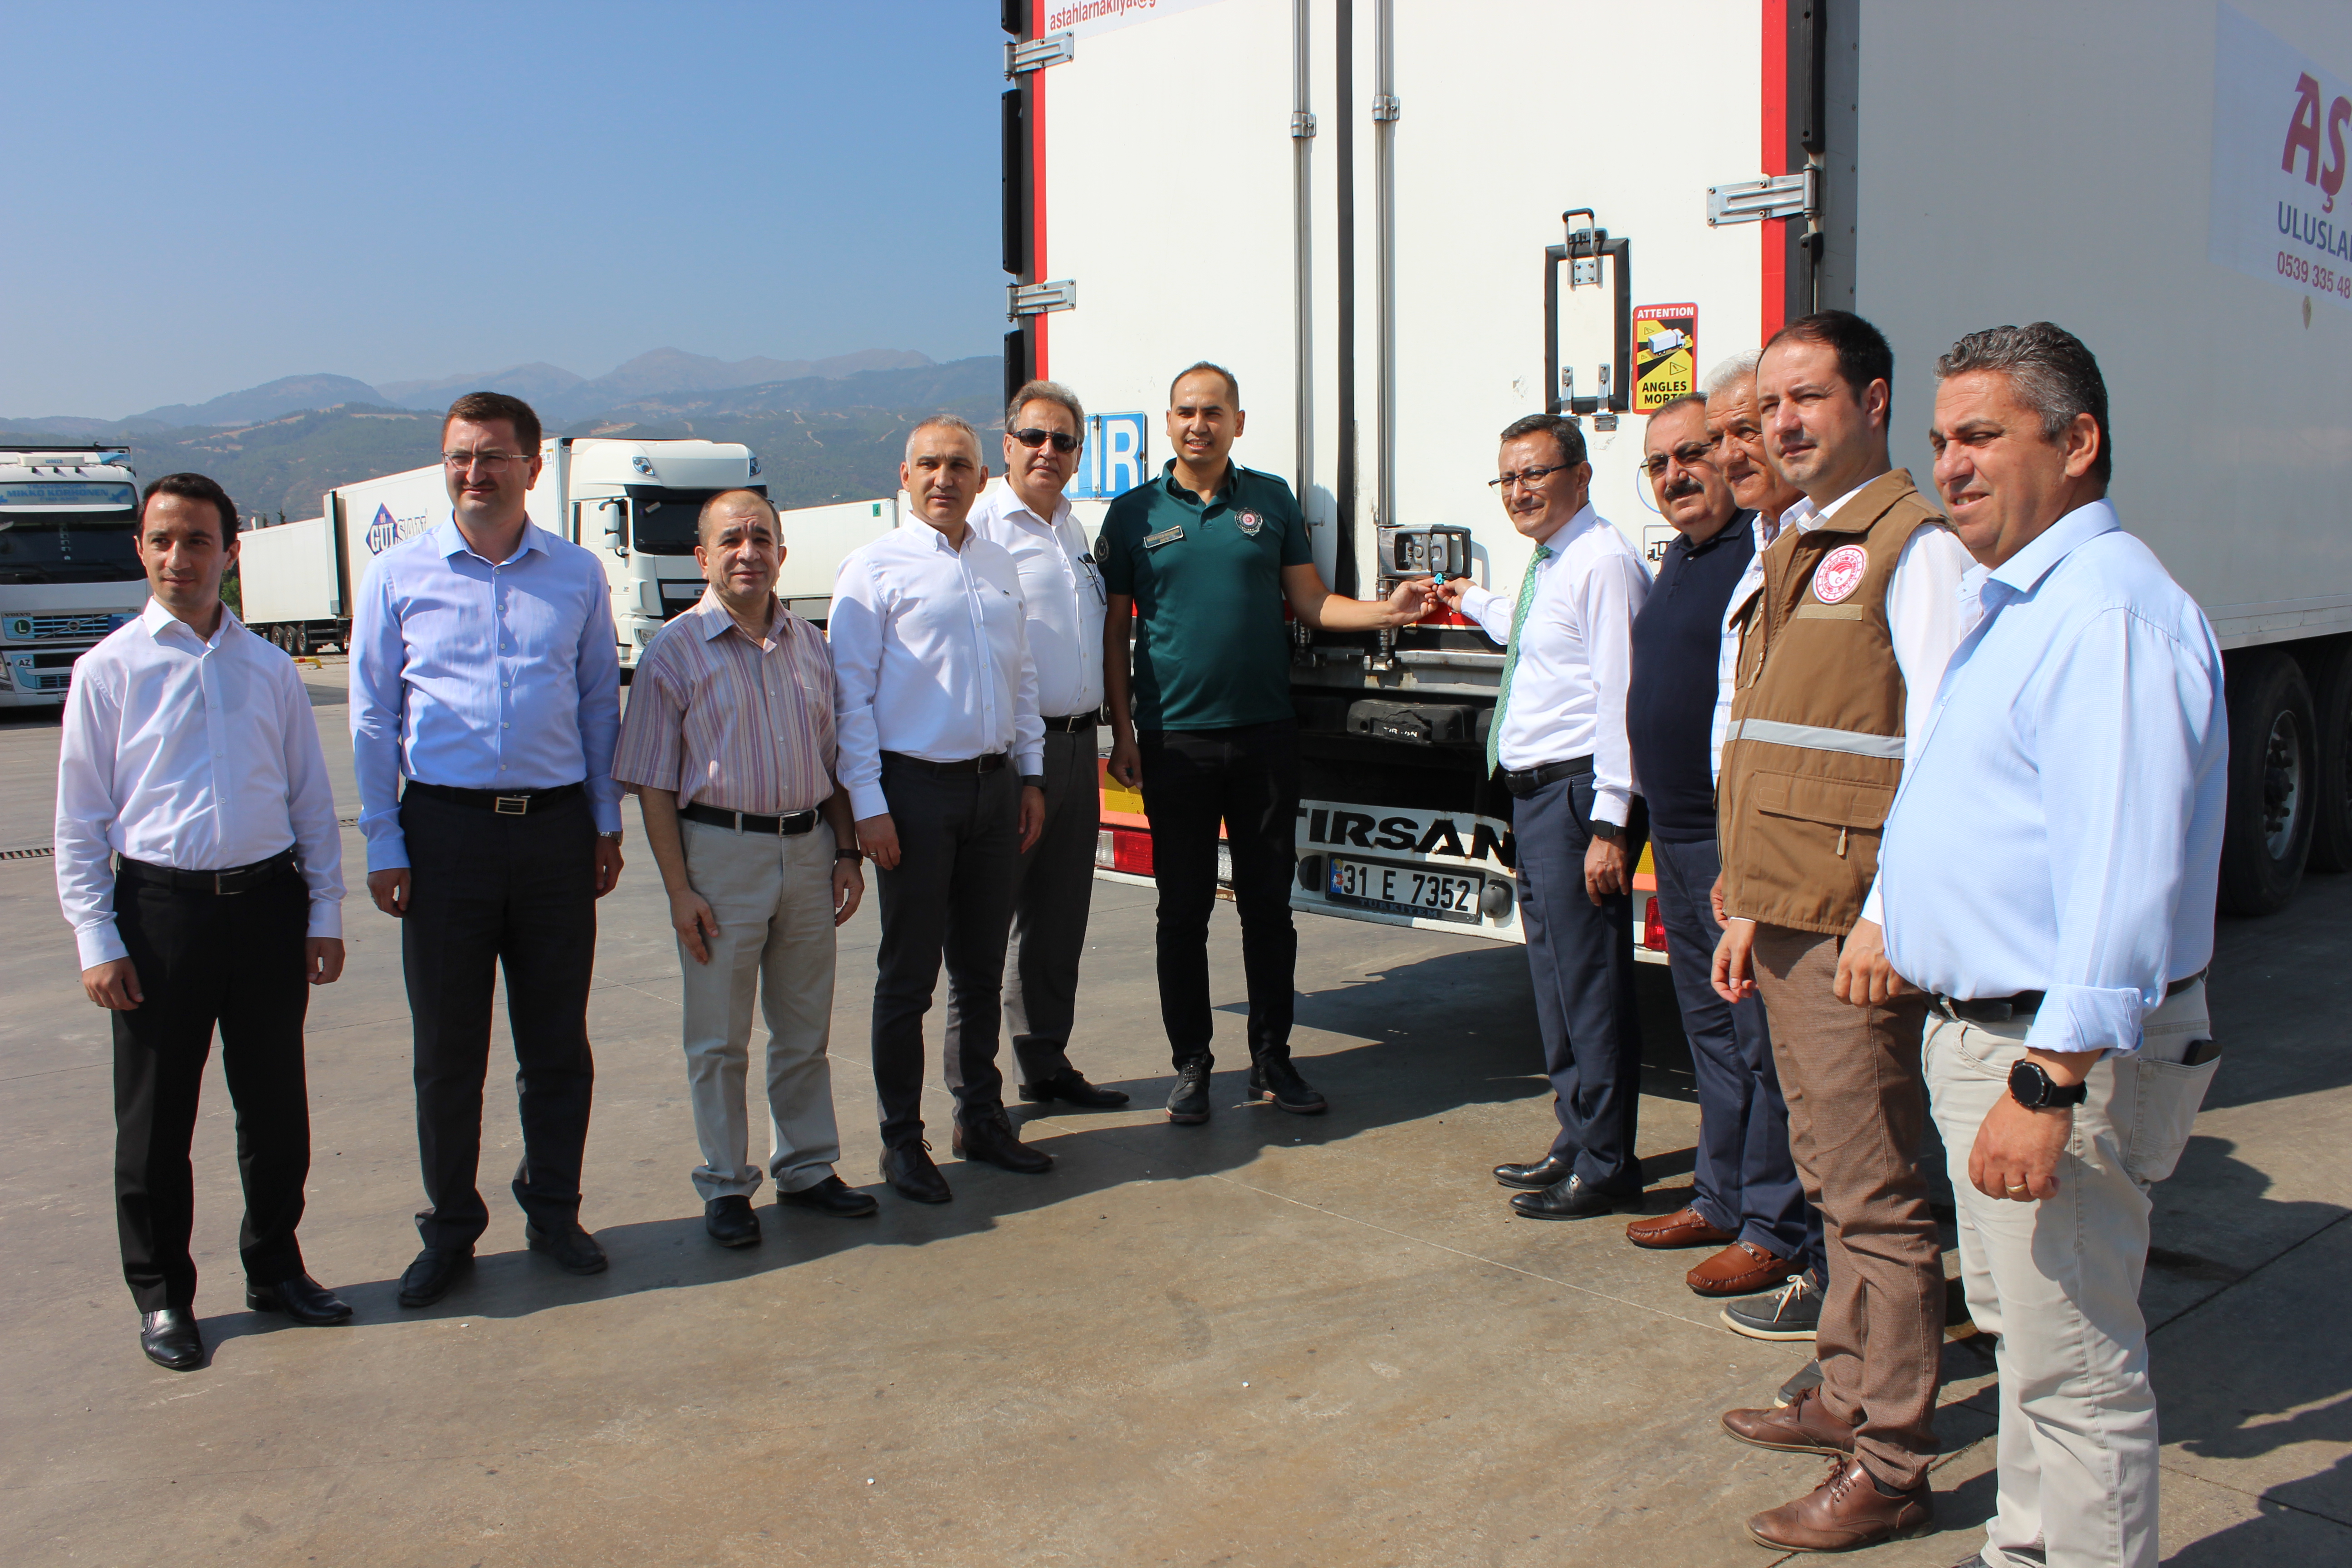 Harvesting and exporting of world-famous seedless Sultaniye grapes from the Alaşehir district of Manisa, which is called the 'Capital of Grapes', has started.